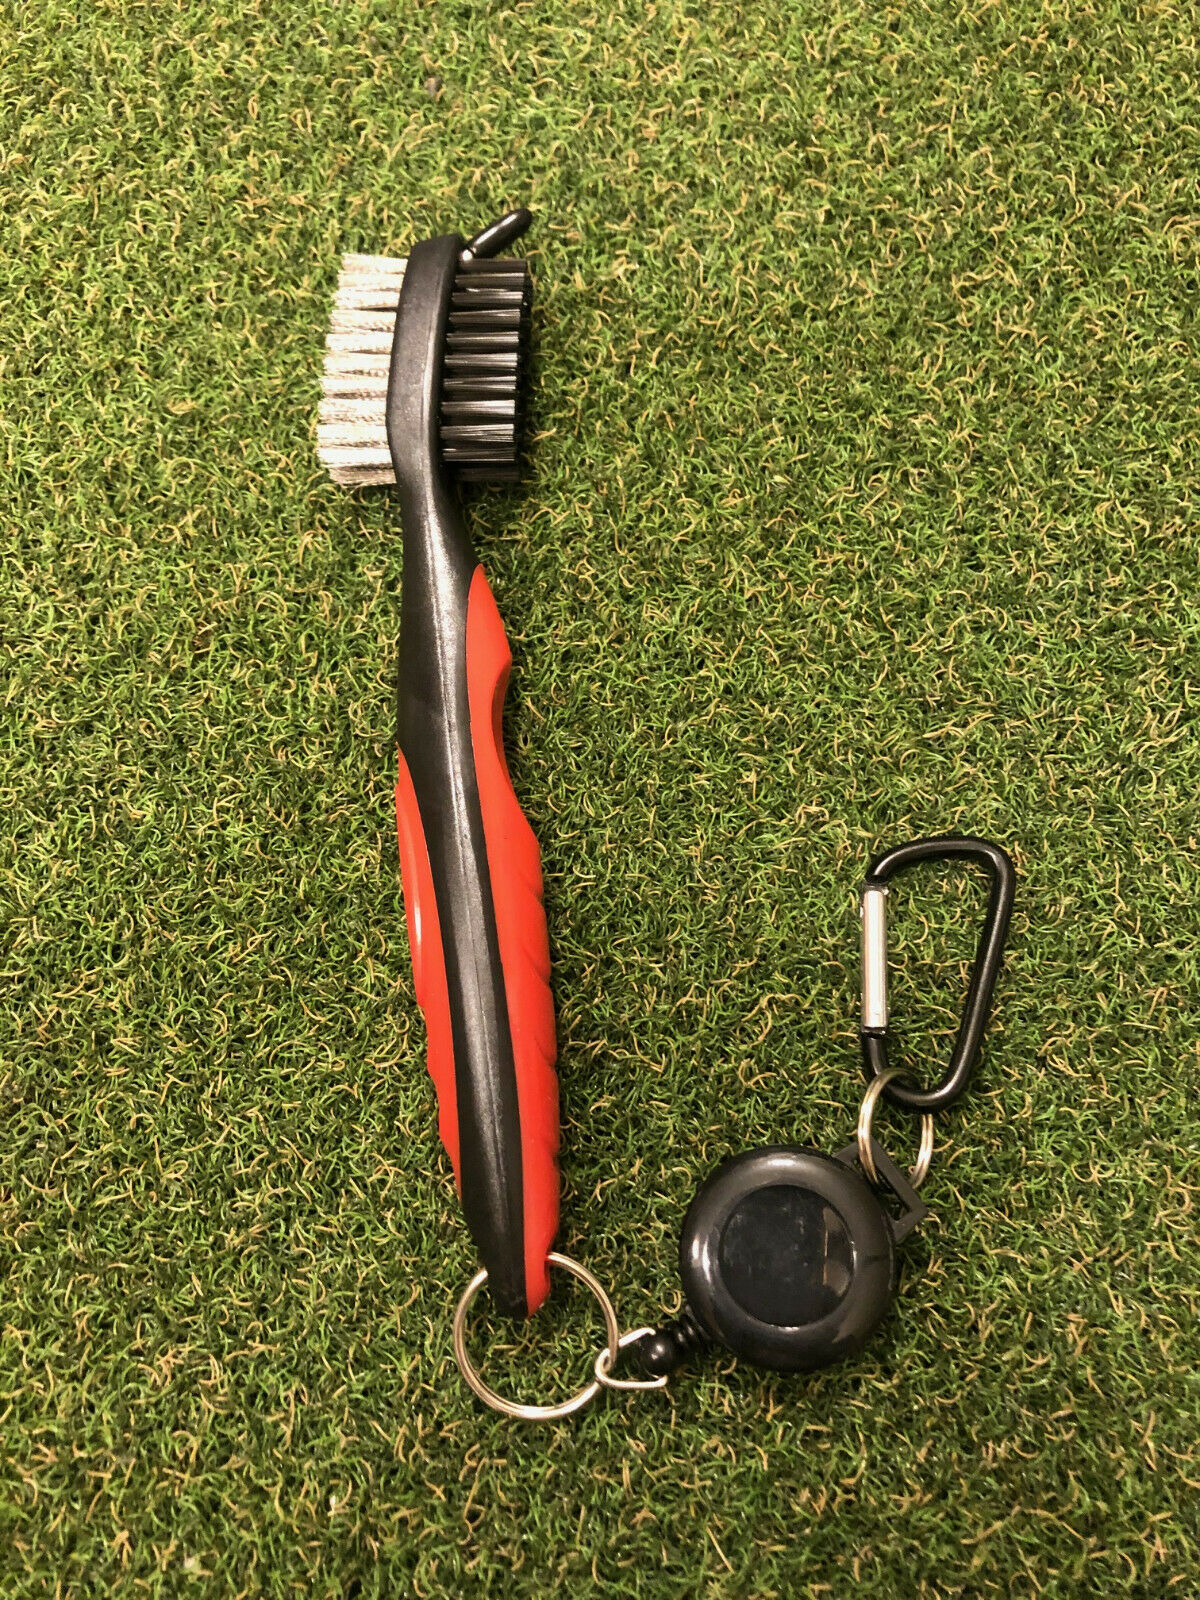 3-in-1 Retractable Golf Club Cleaning Brush Double Sided - Red, Blue, Black - The Golf Club Trader